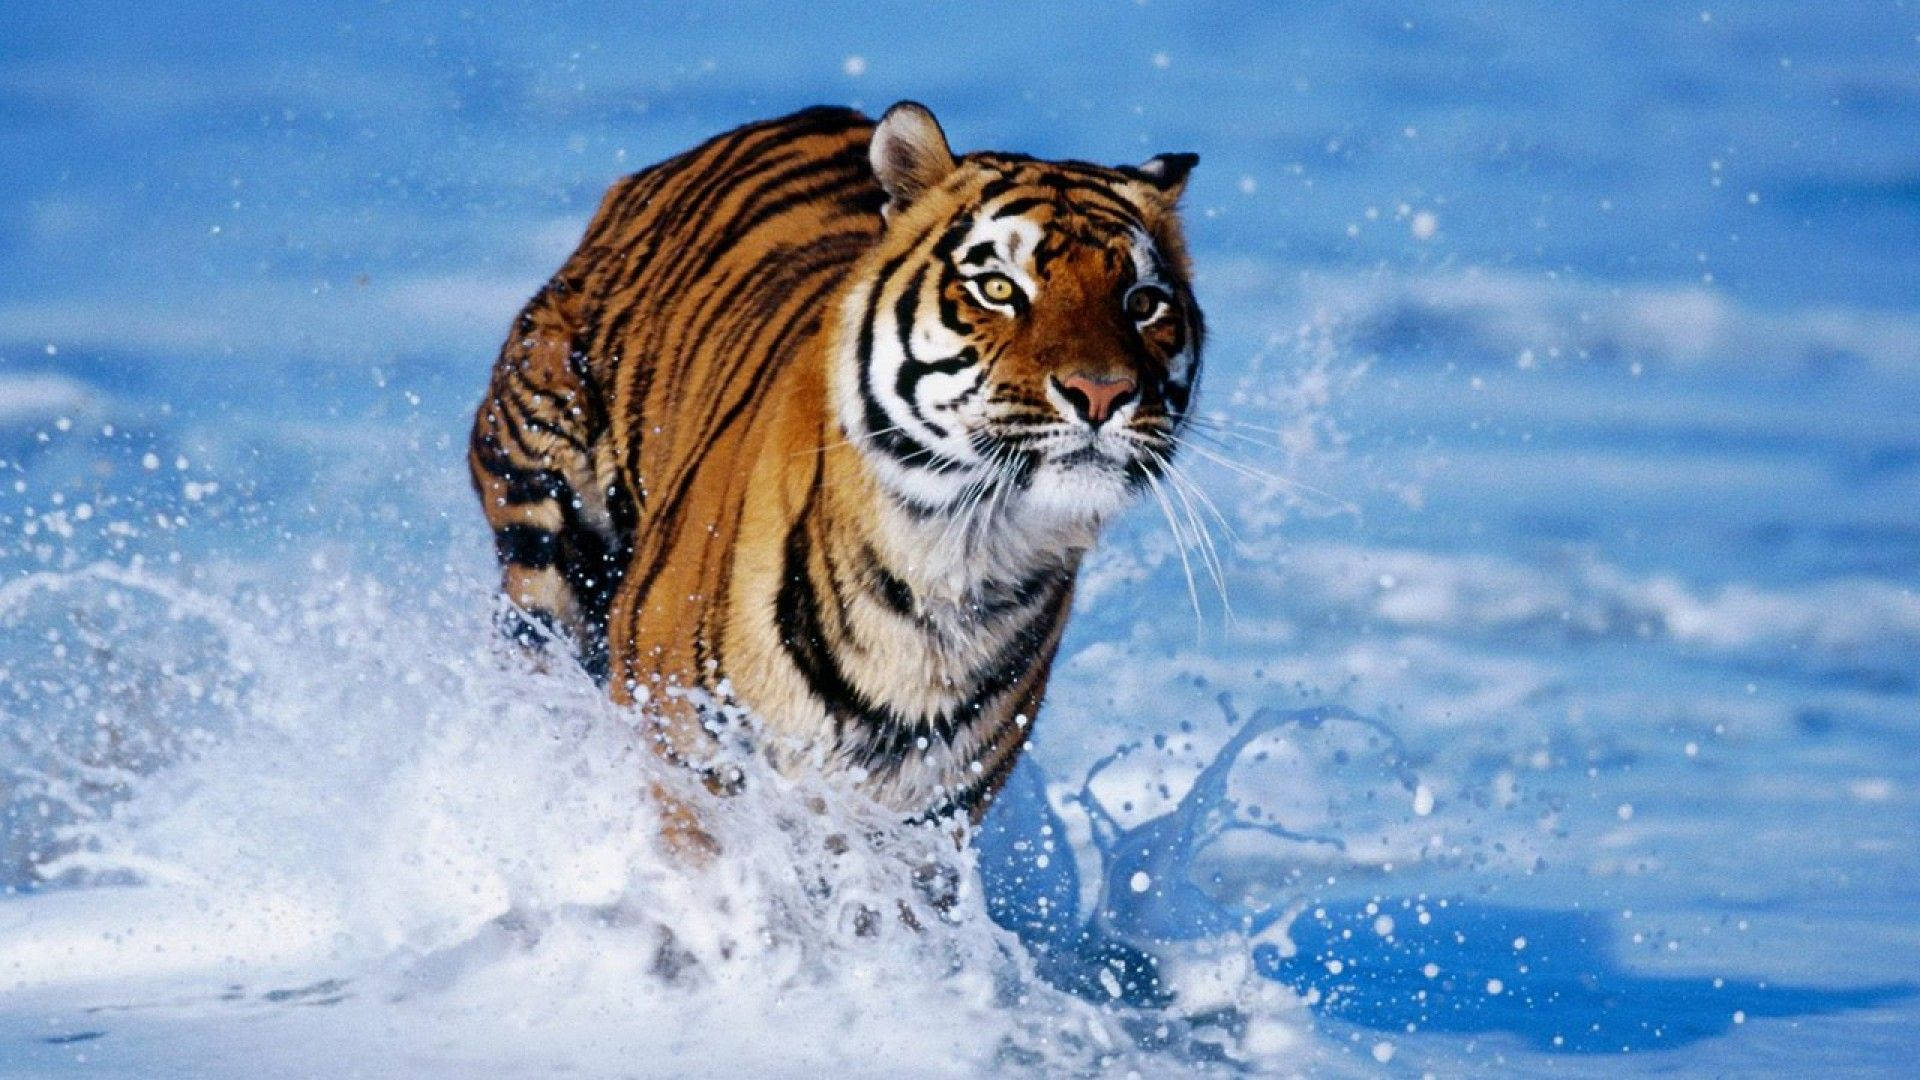 Tiger Running In Water Background